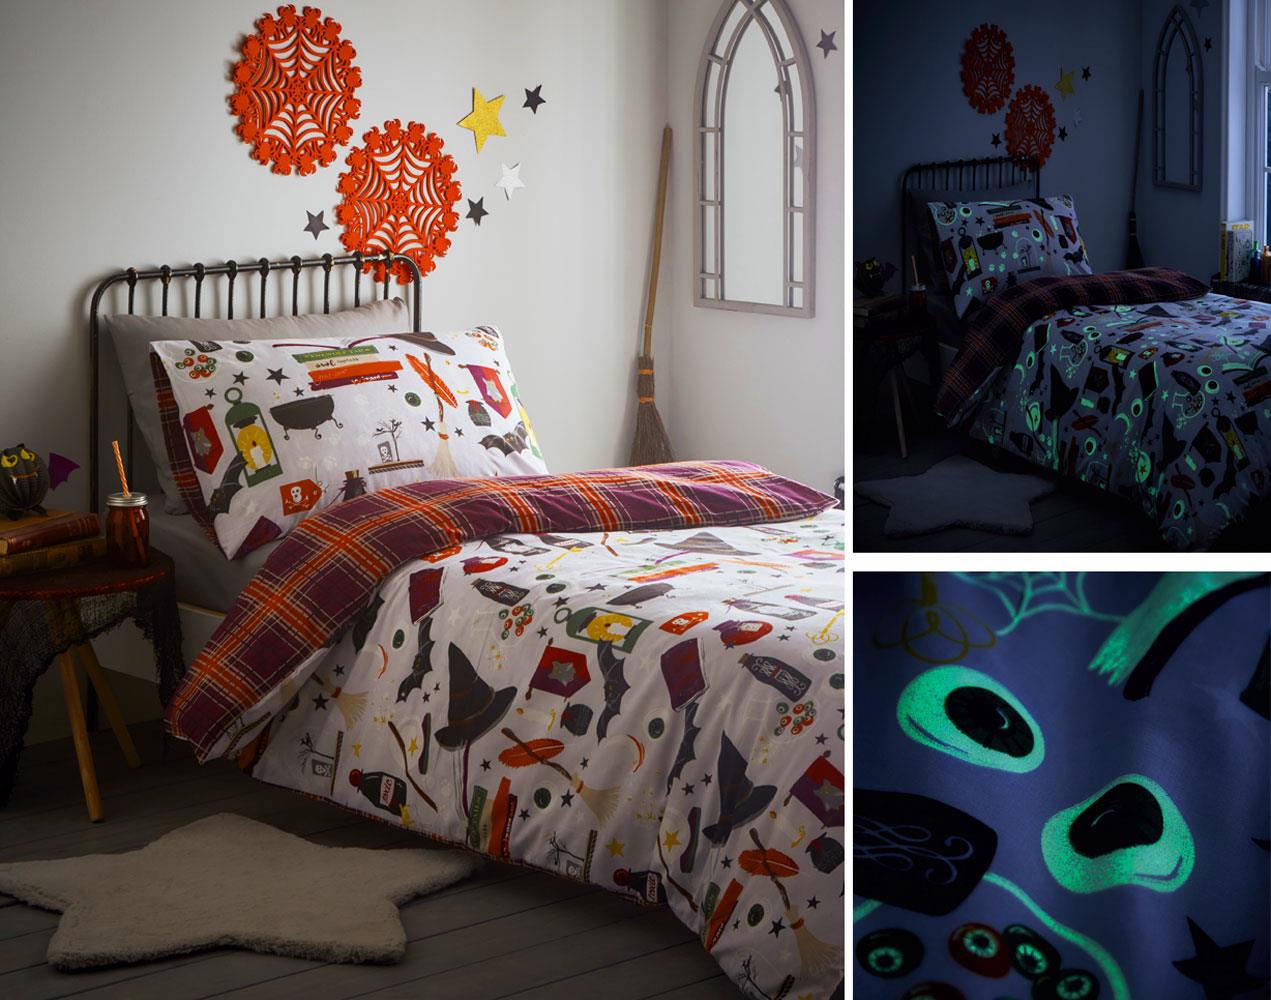 Duvet set quilt cover pillow cases wizard witches wands glow in the dark bedding